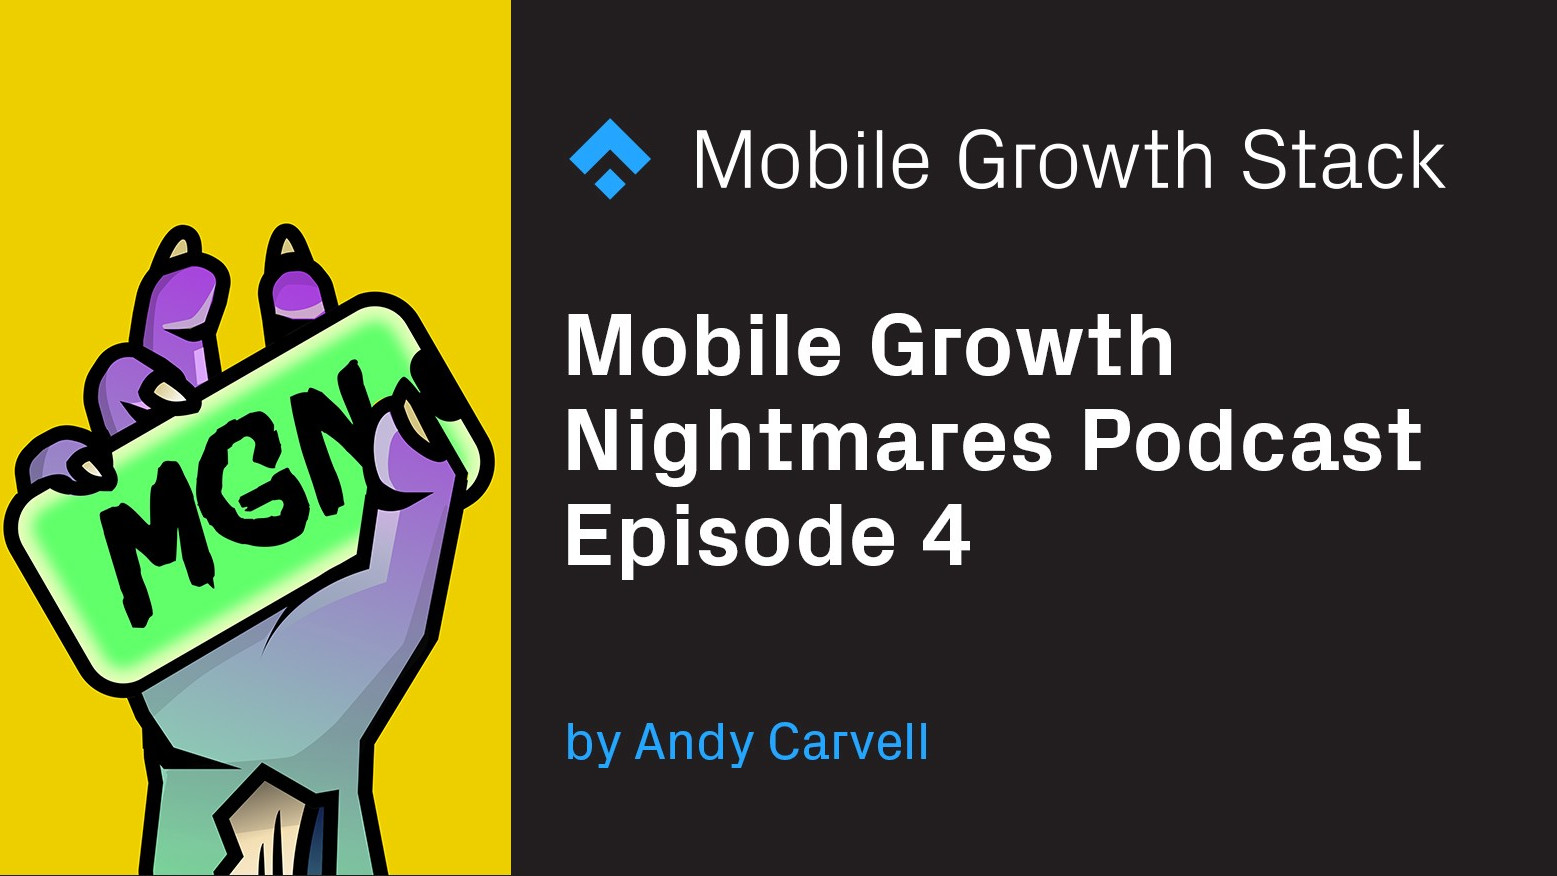 Mobile Growth Nightmares Episode 4 — Steve P. Young from App Masters